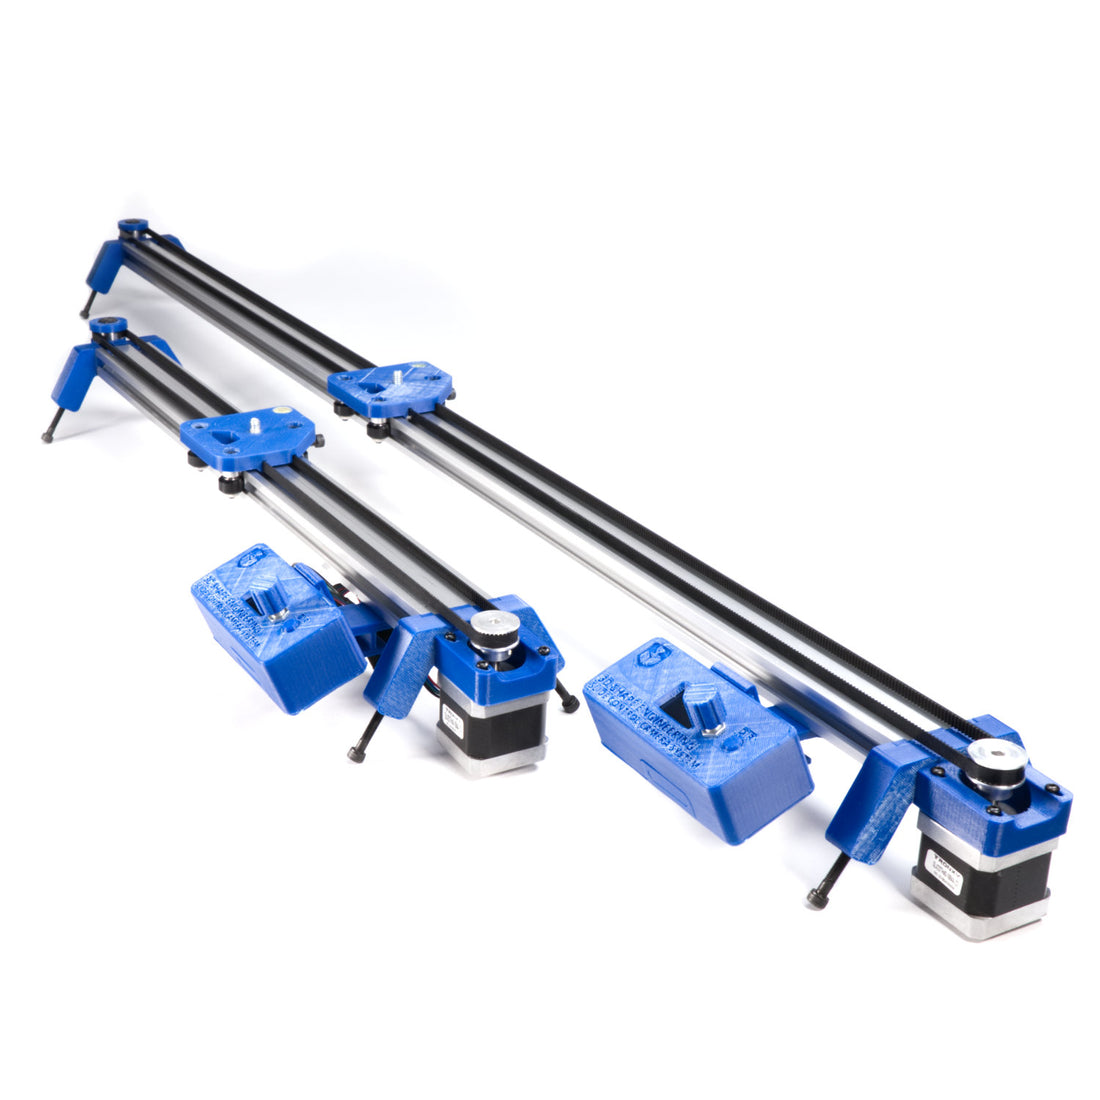 Smaller 500 mm slider available & more new products!